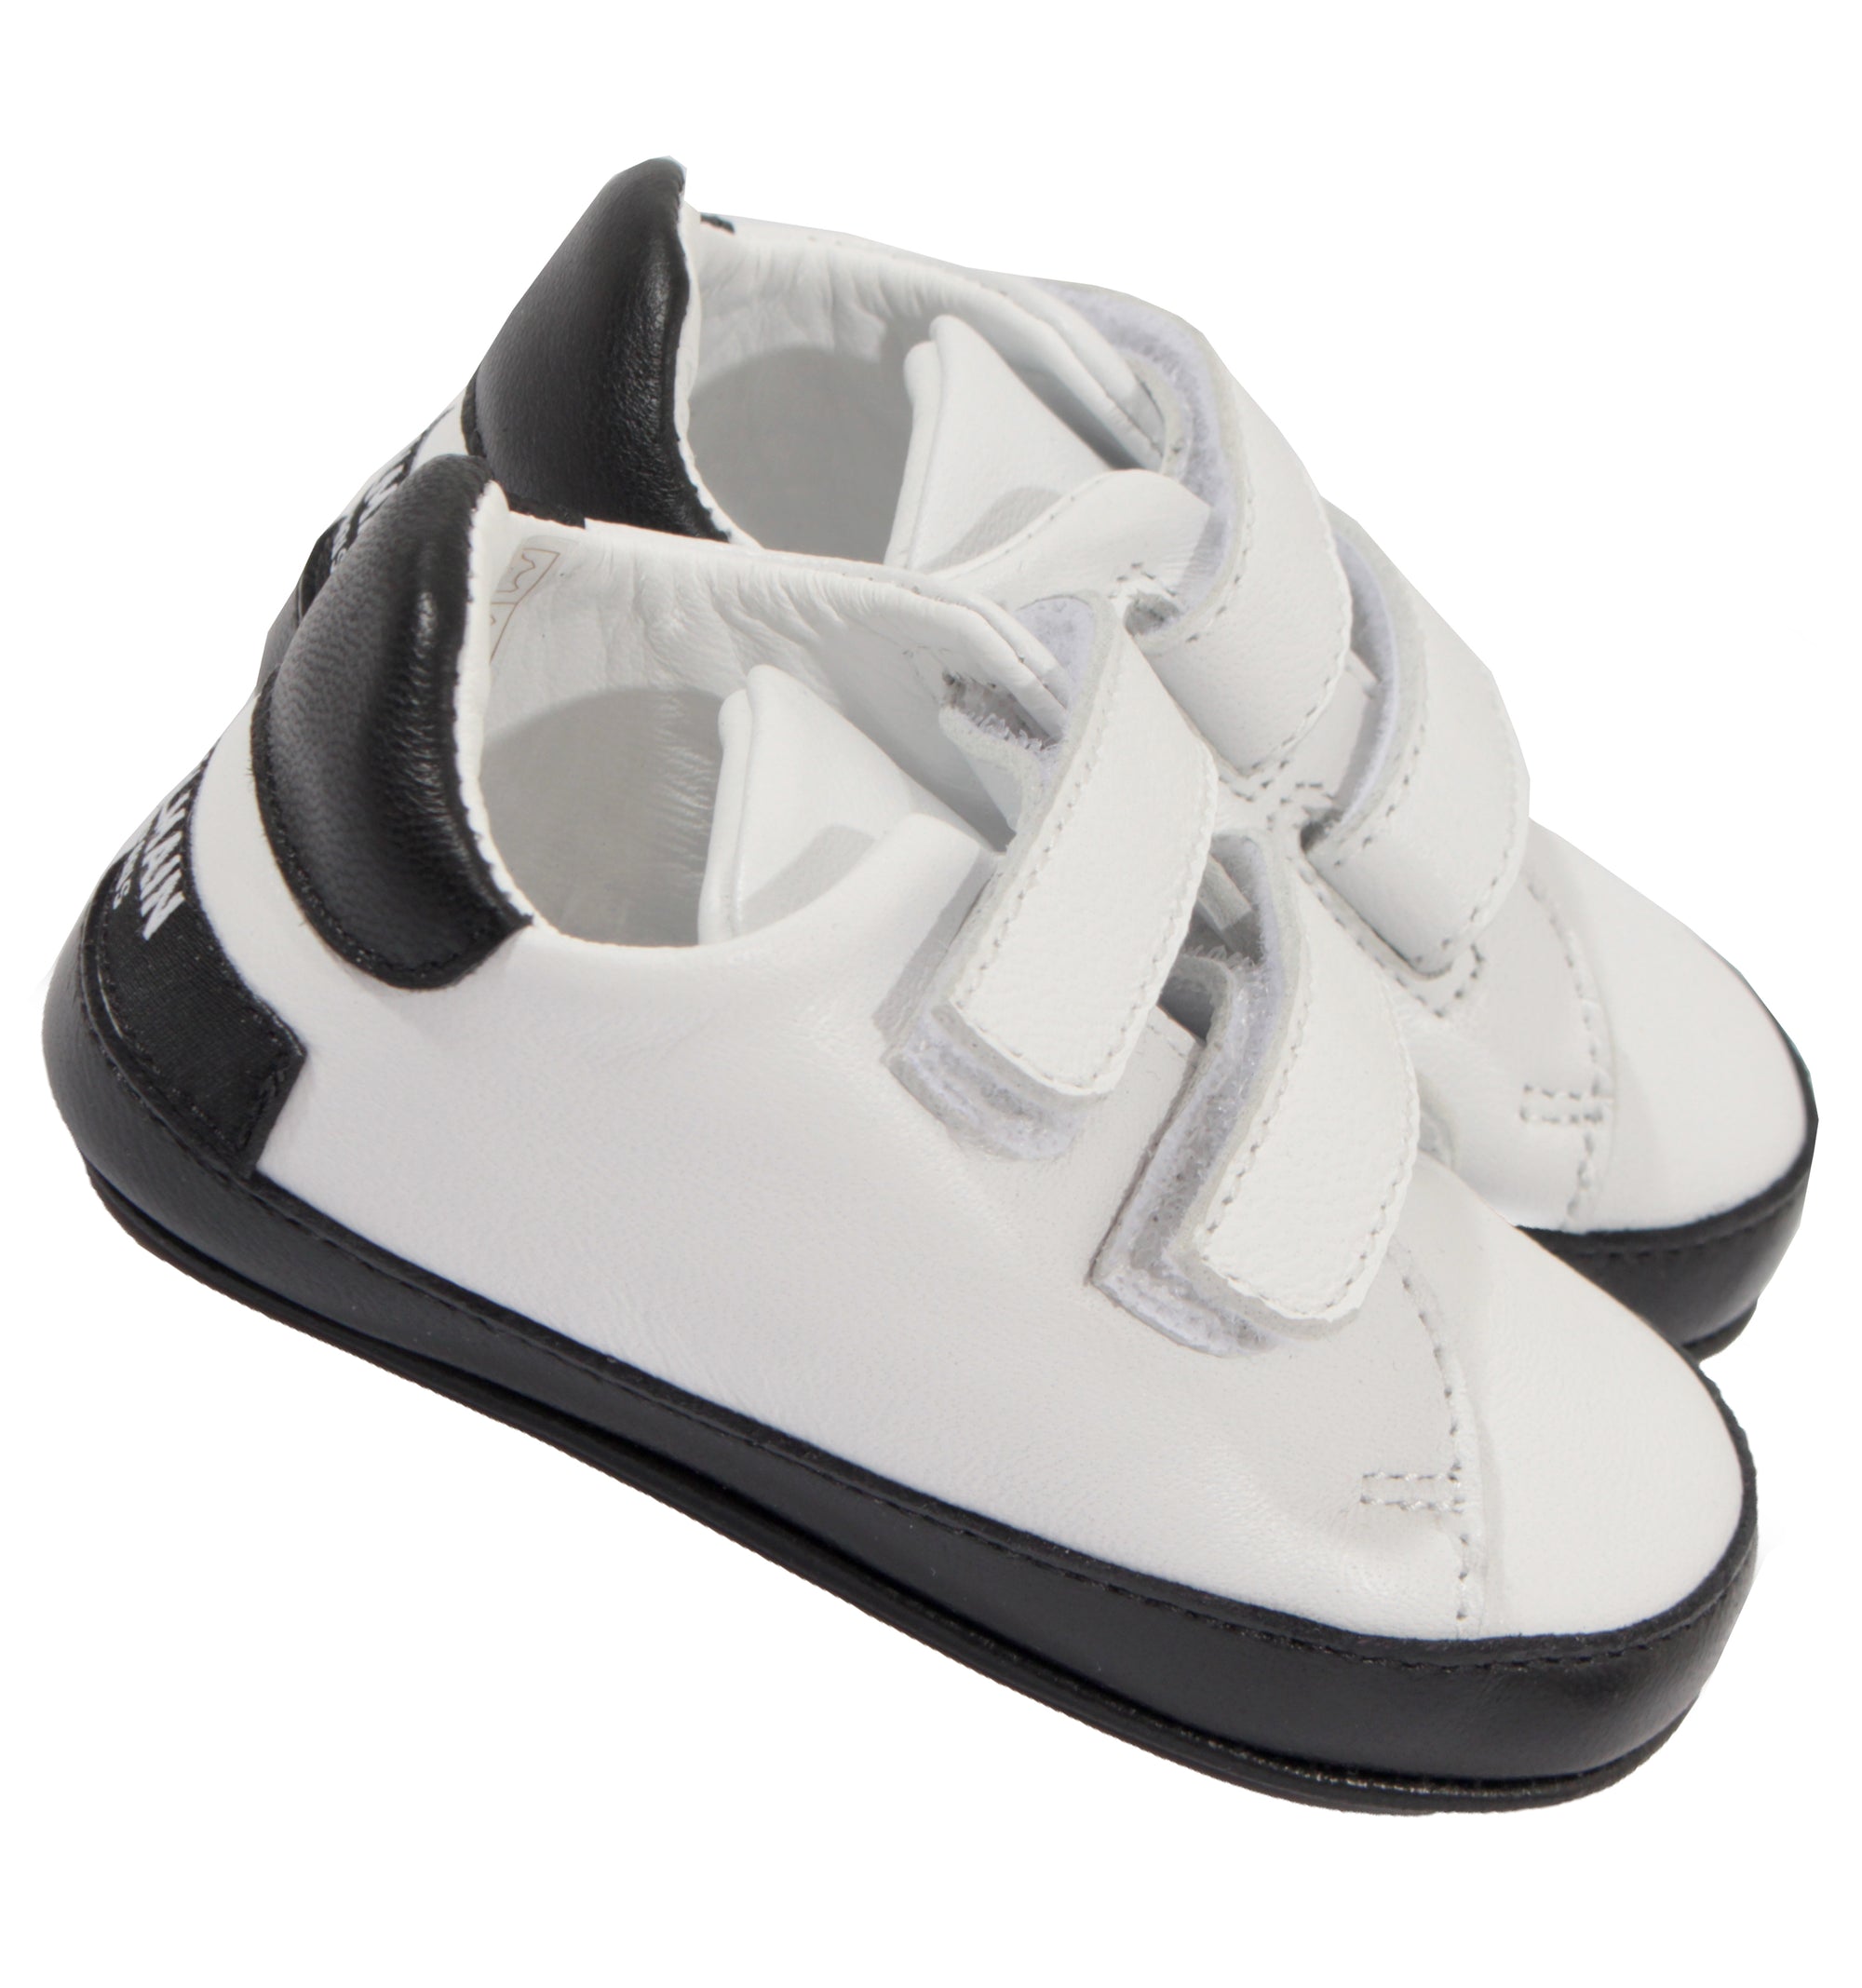 Crib Shoes With Contrast Soles - White & Black